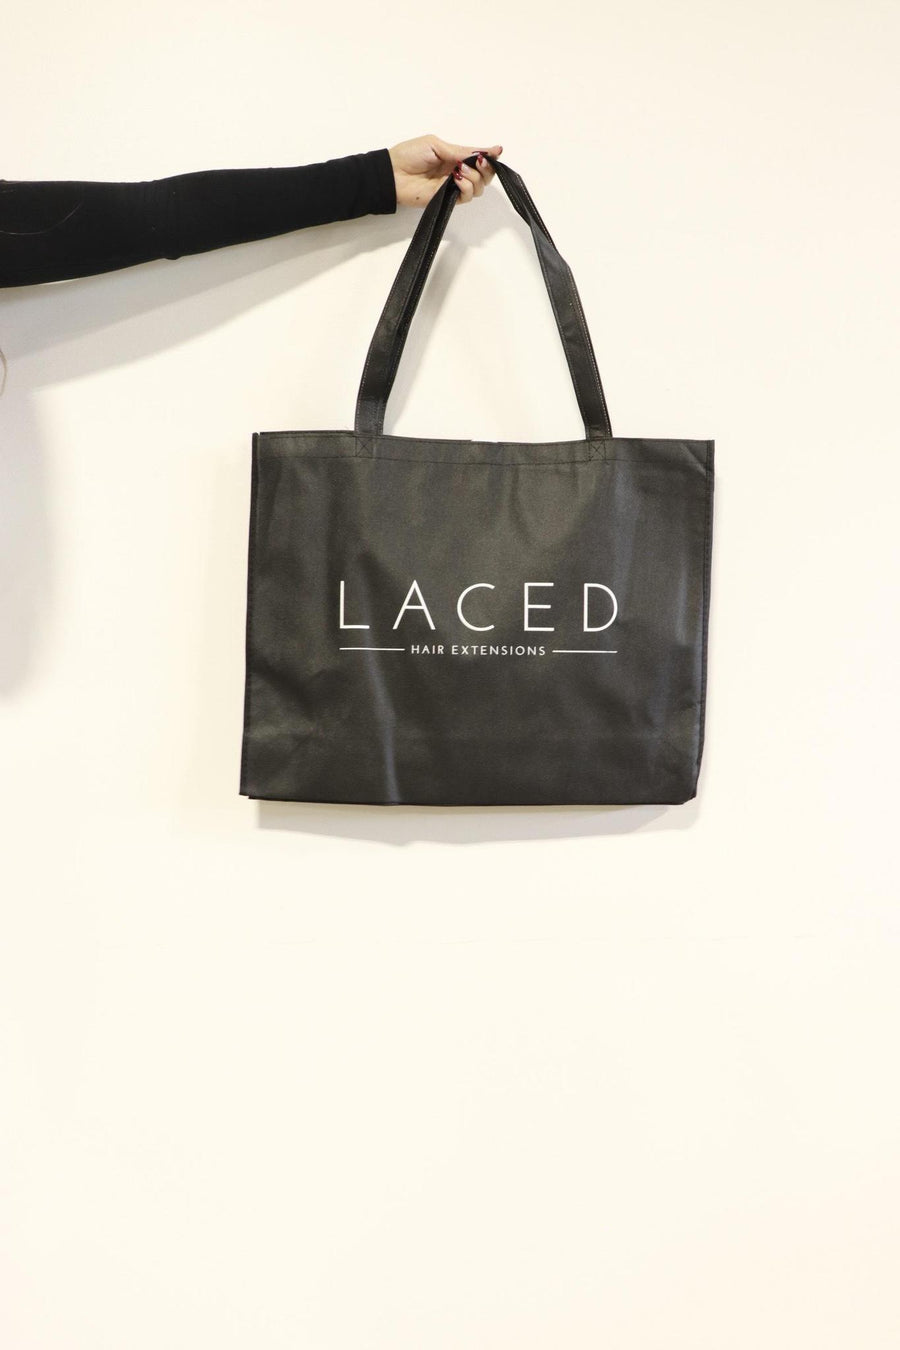 Laced Hair Reusable Tote Bags (10-Pack)